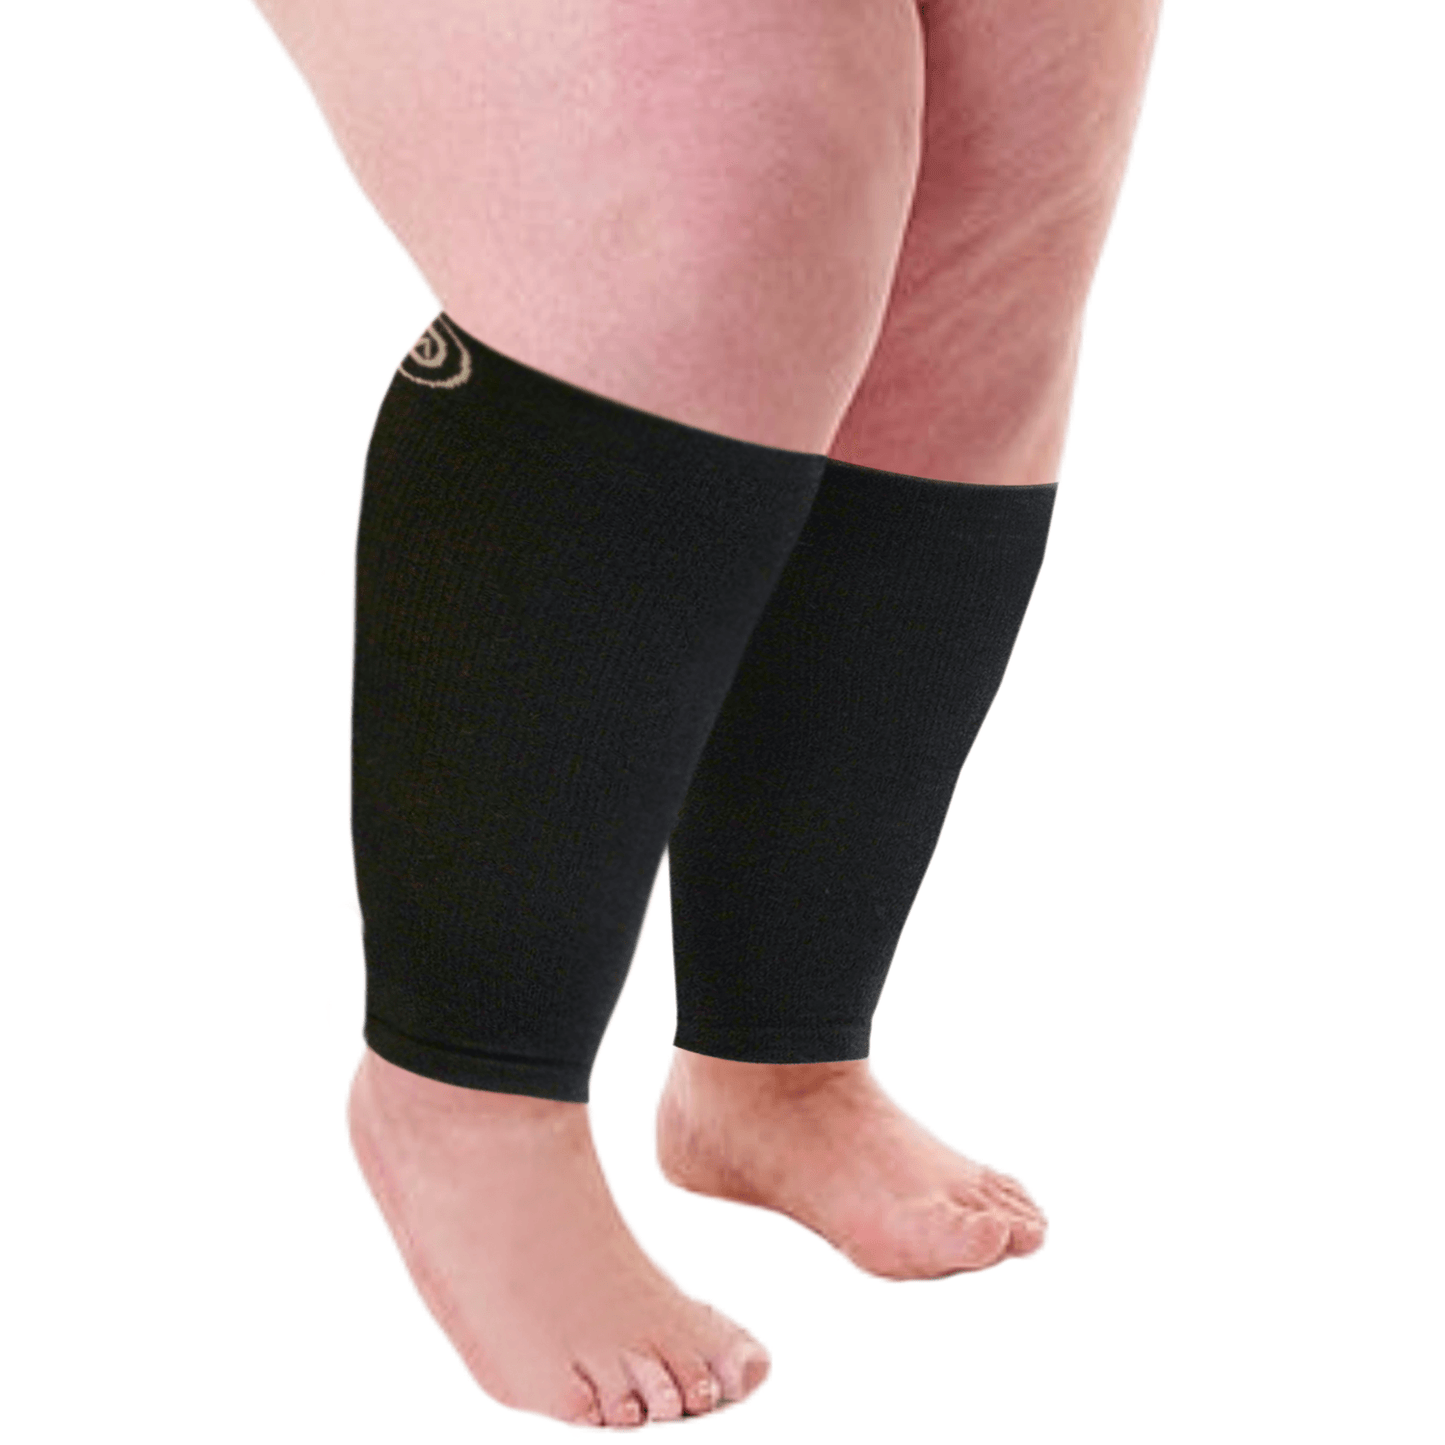  Crucial Compression Calf Sleeves for Men & Women (Pair